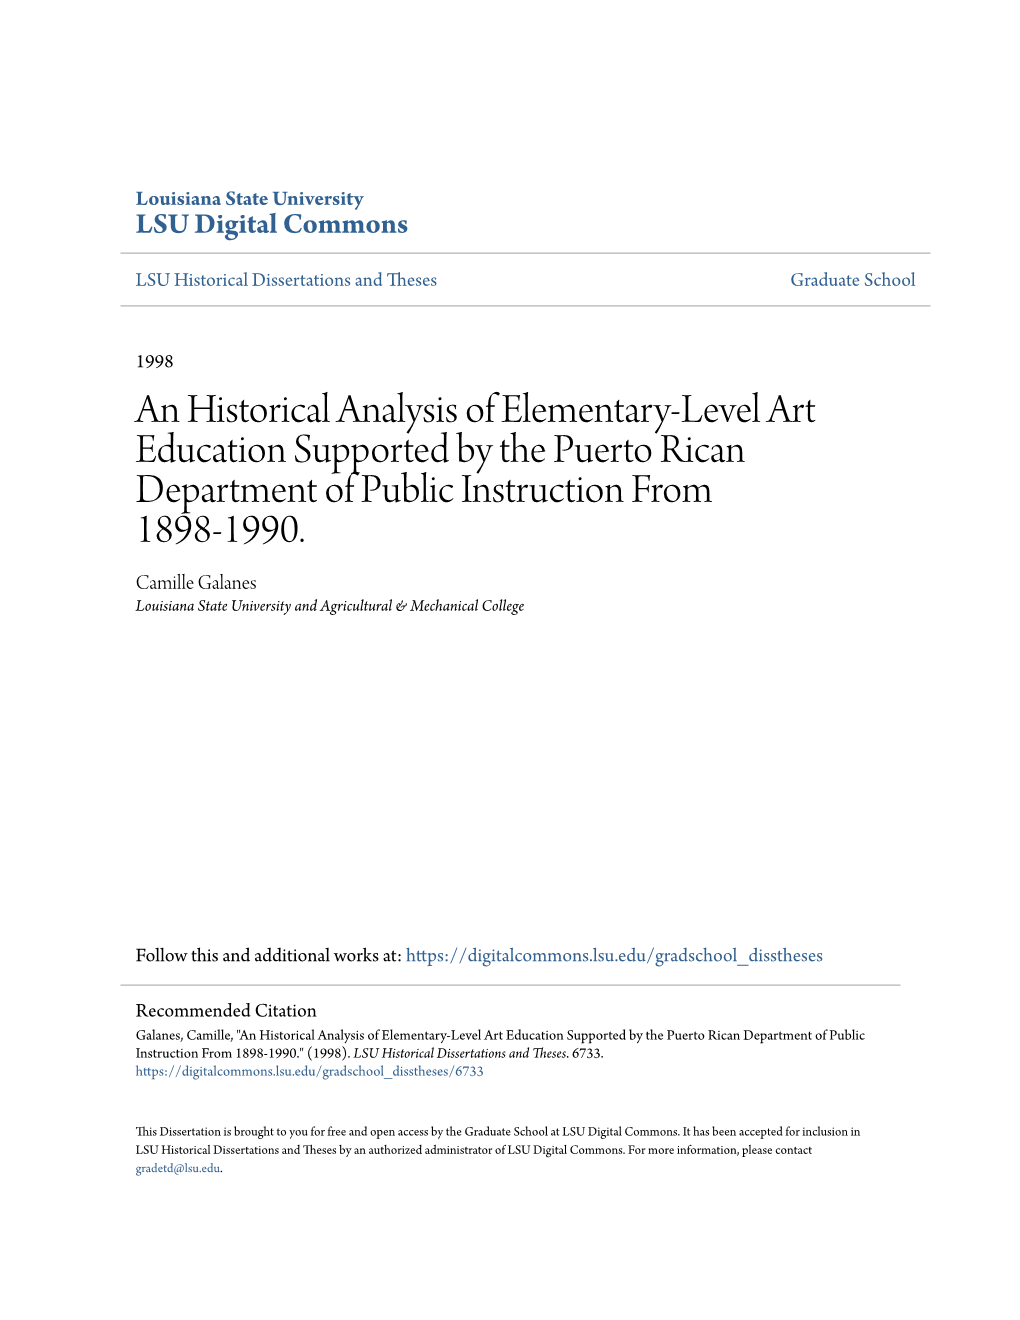 An Historical Analysis of Elementary-Level Art Education Supported by the Puerto Rican Department of Public Instruction from 1898-1990